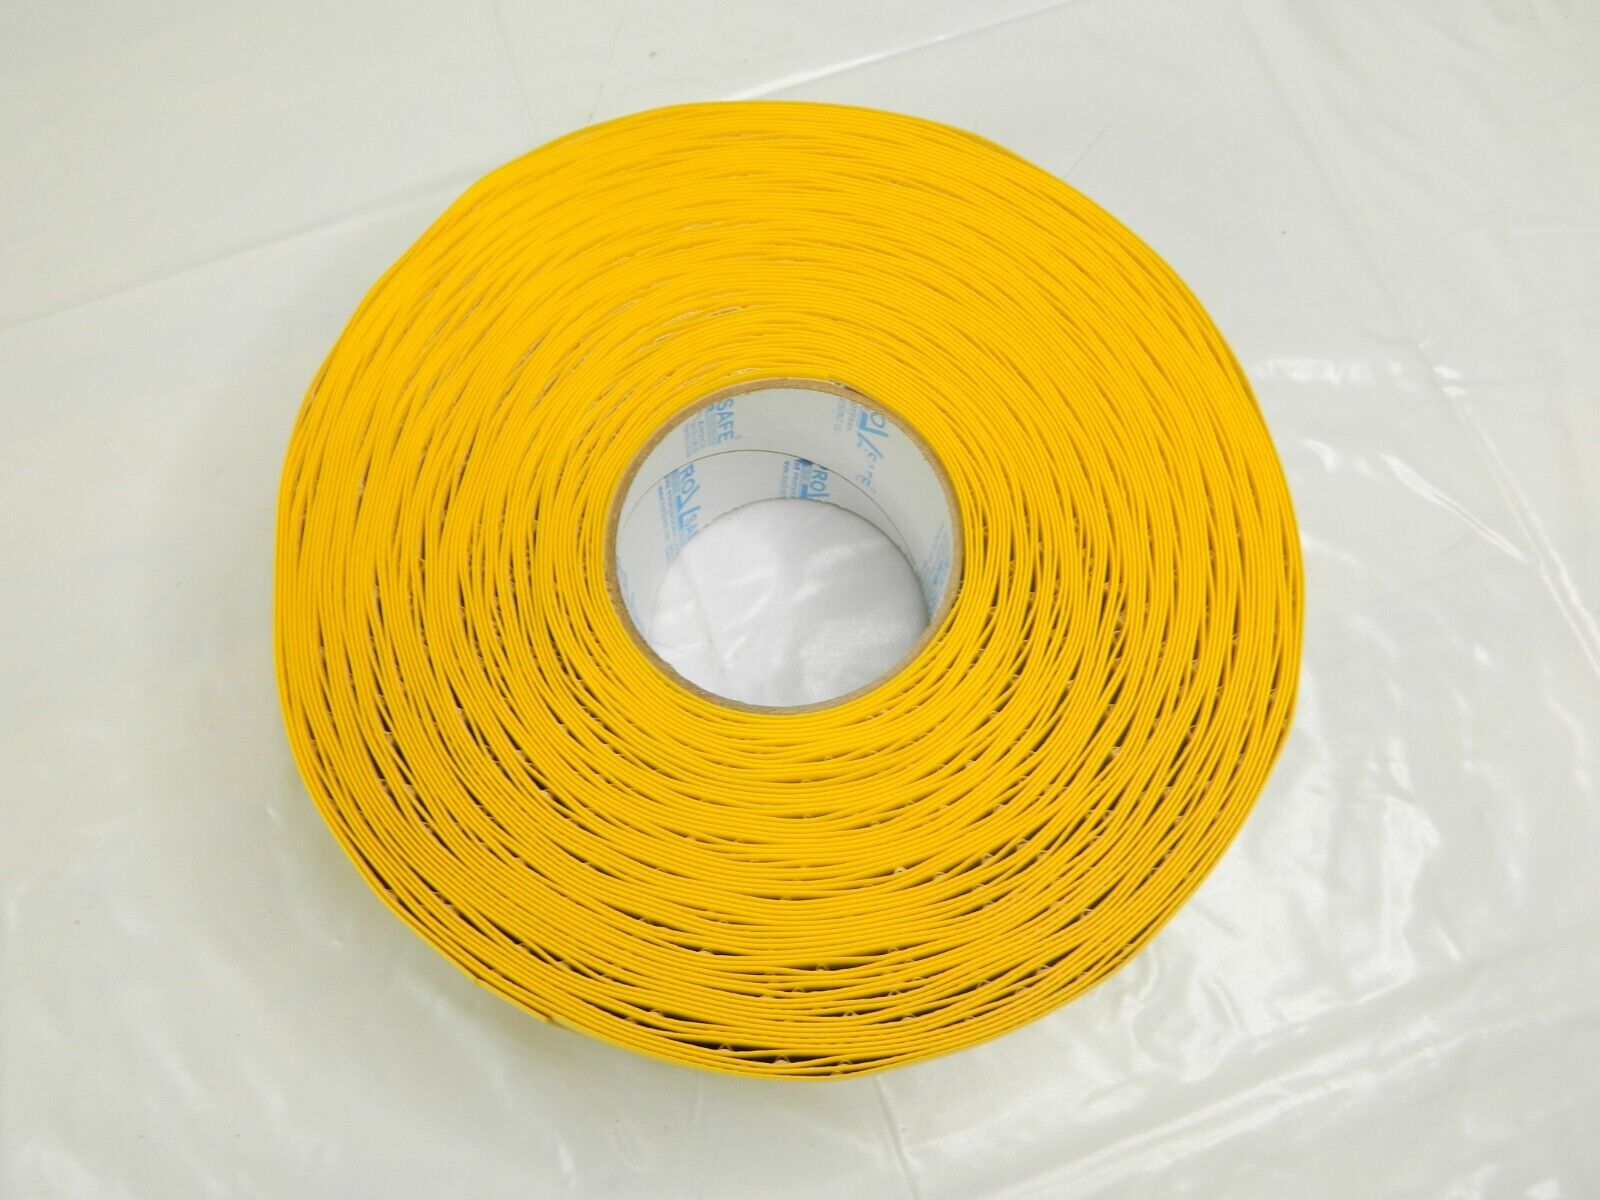 PRO-SAFE Floor & Aisle Marking Tape: 3 Wide, 100' Long, 50 Mil Thick, Polyvinylchloride MPN:PRO-3RY